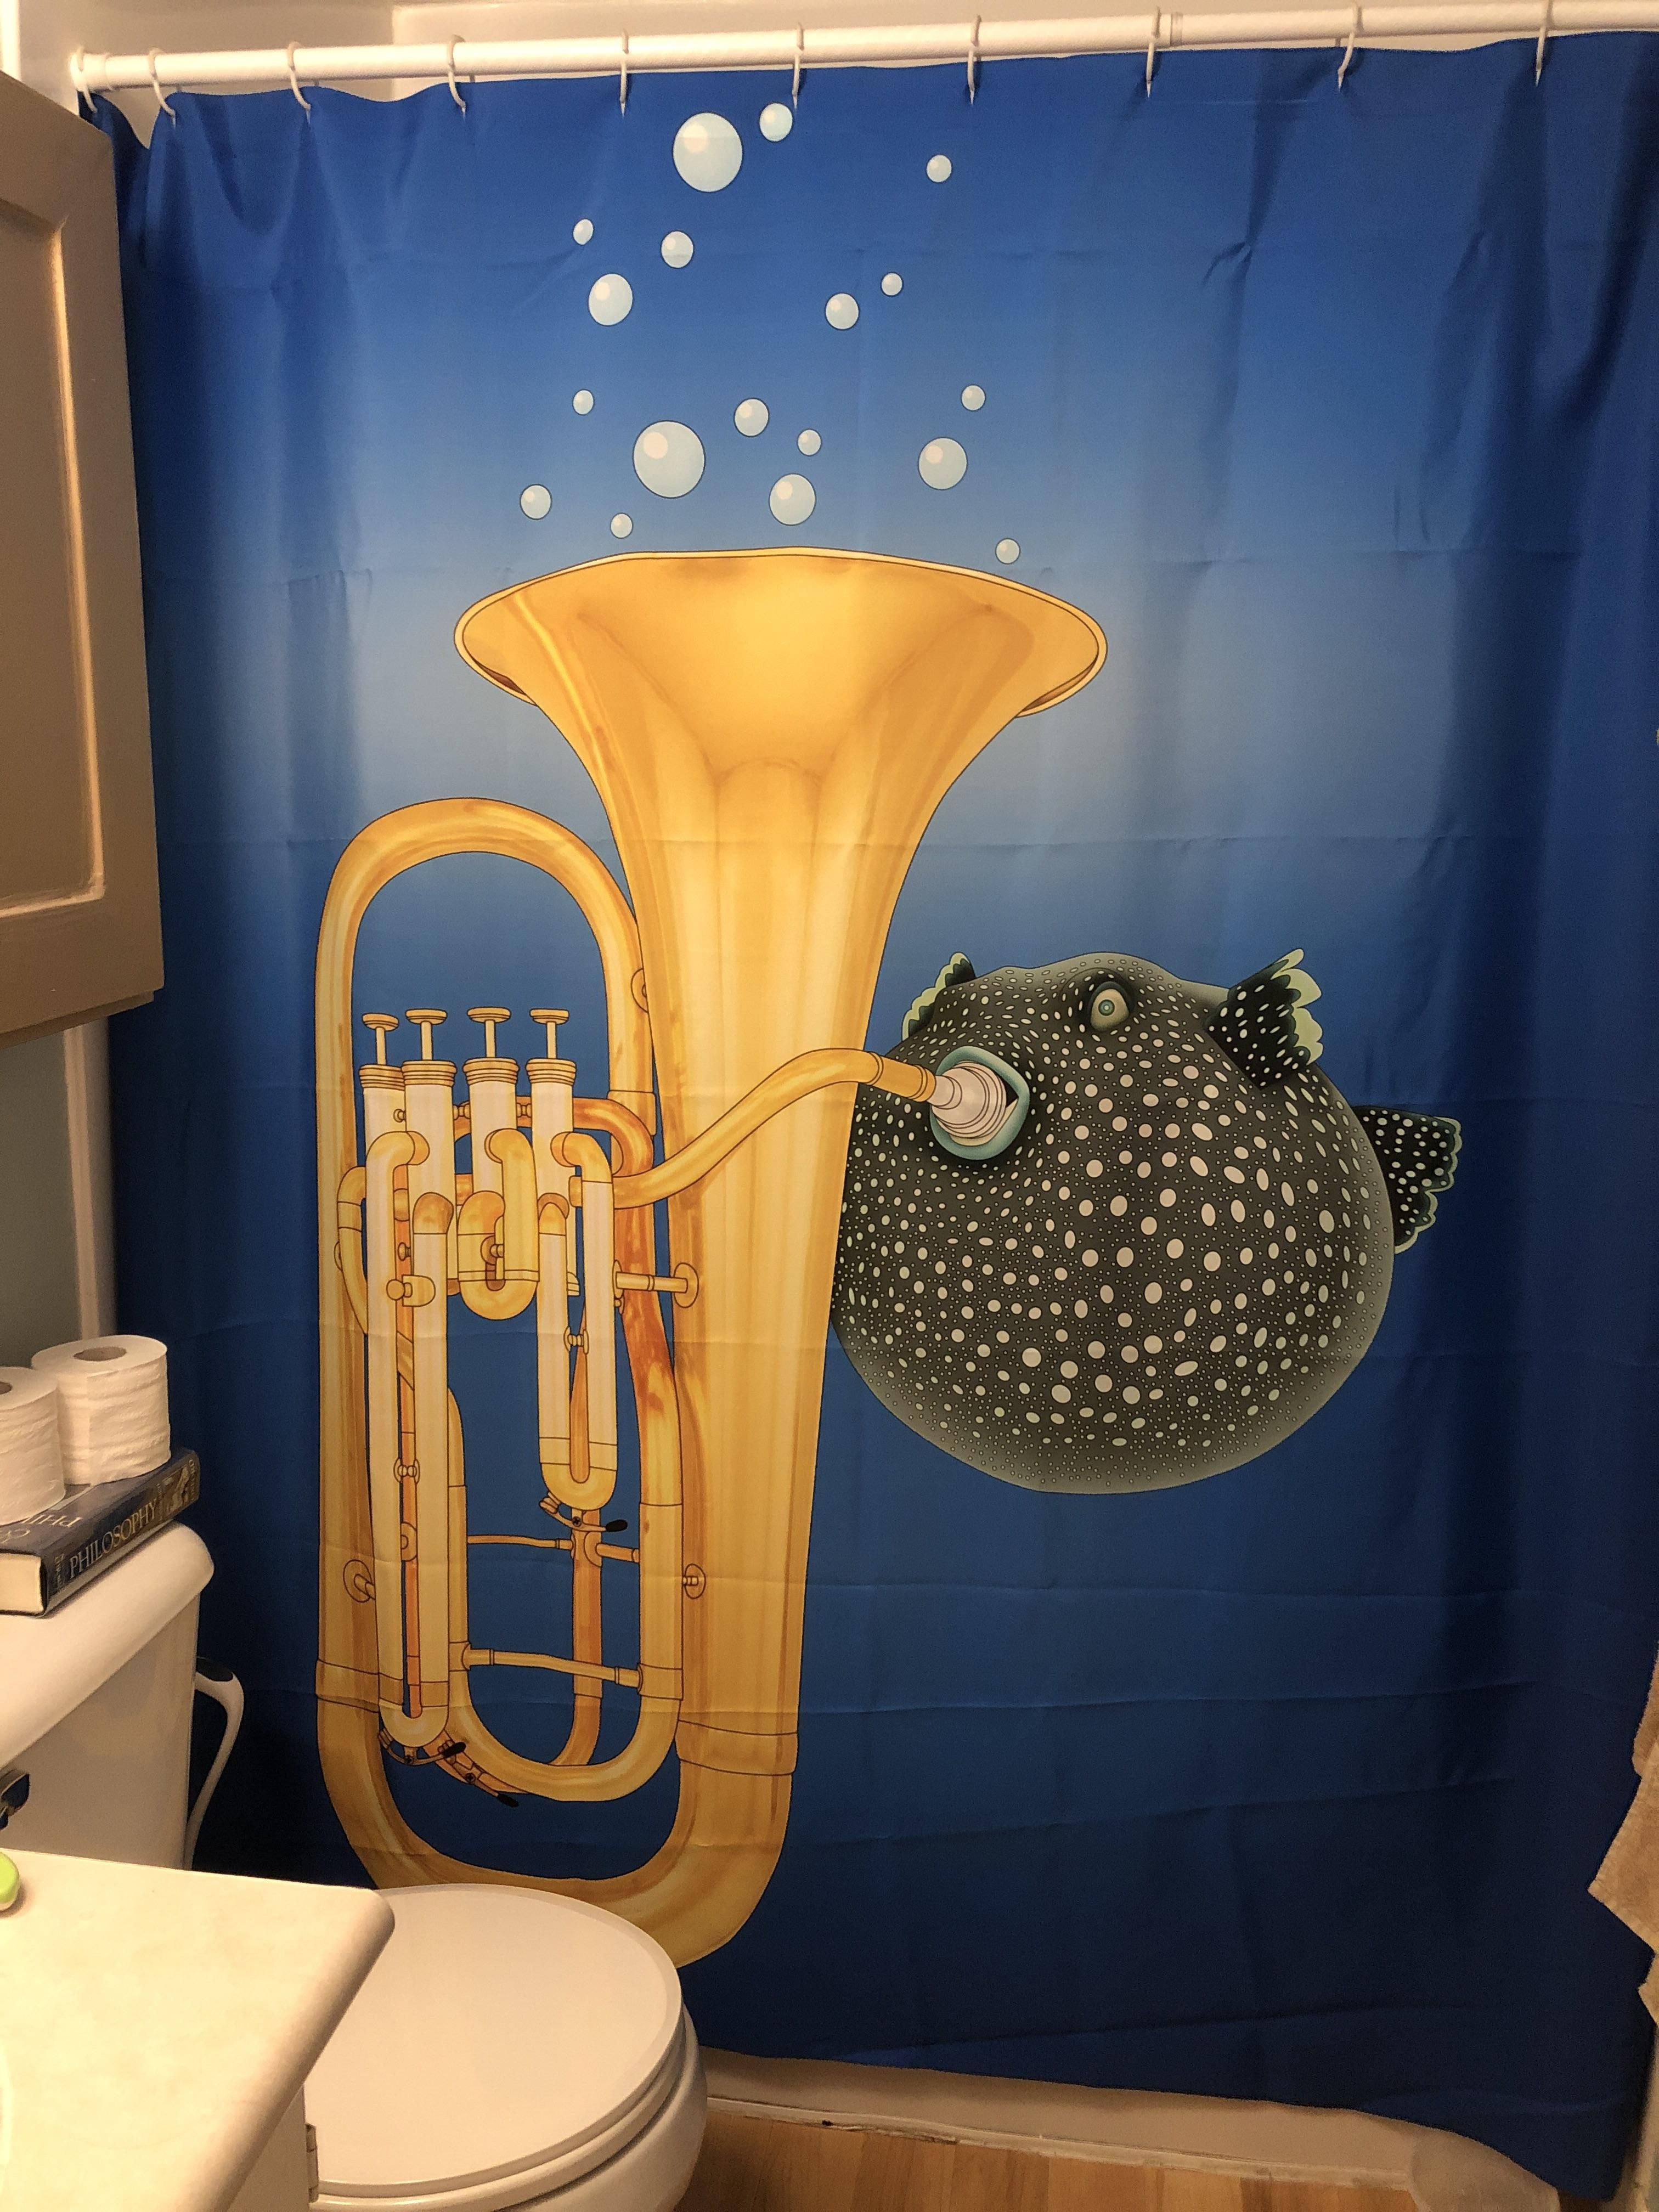 The perfect shower curtain doesn’t exis—